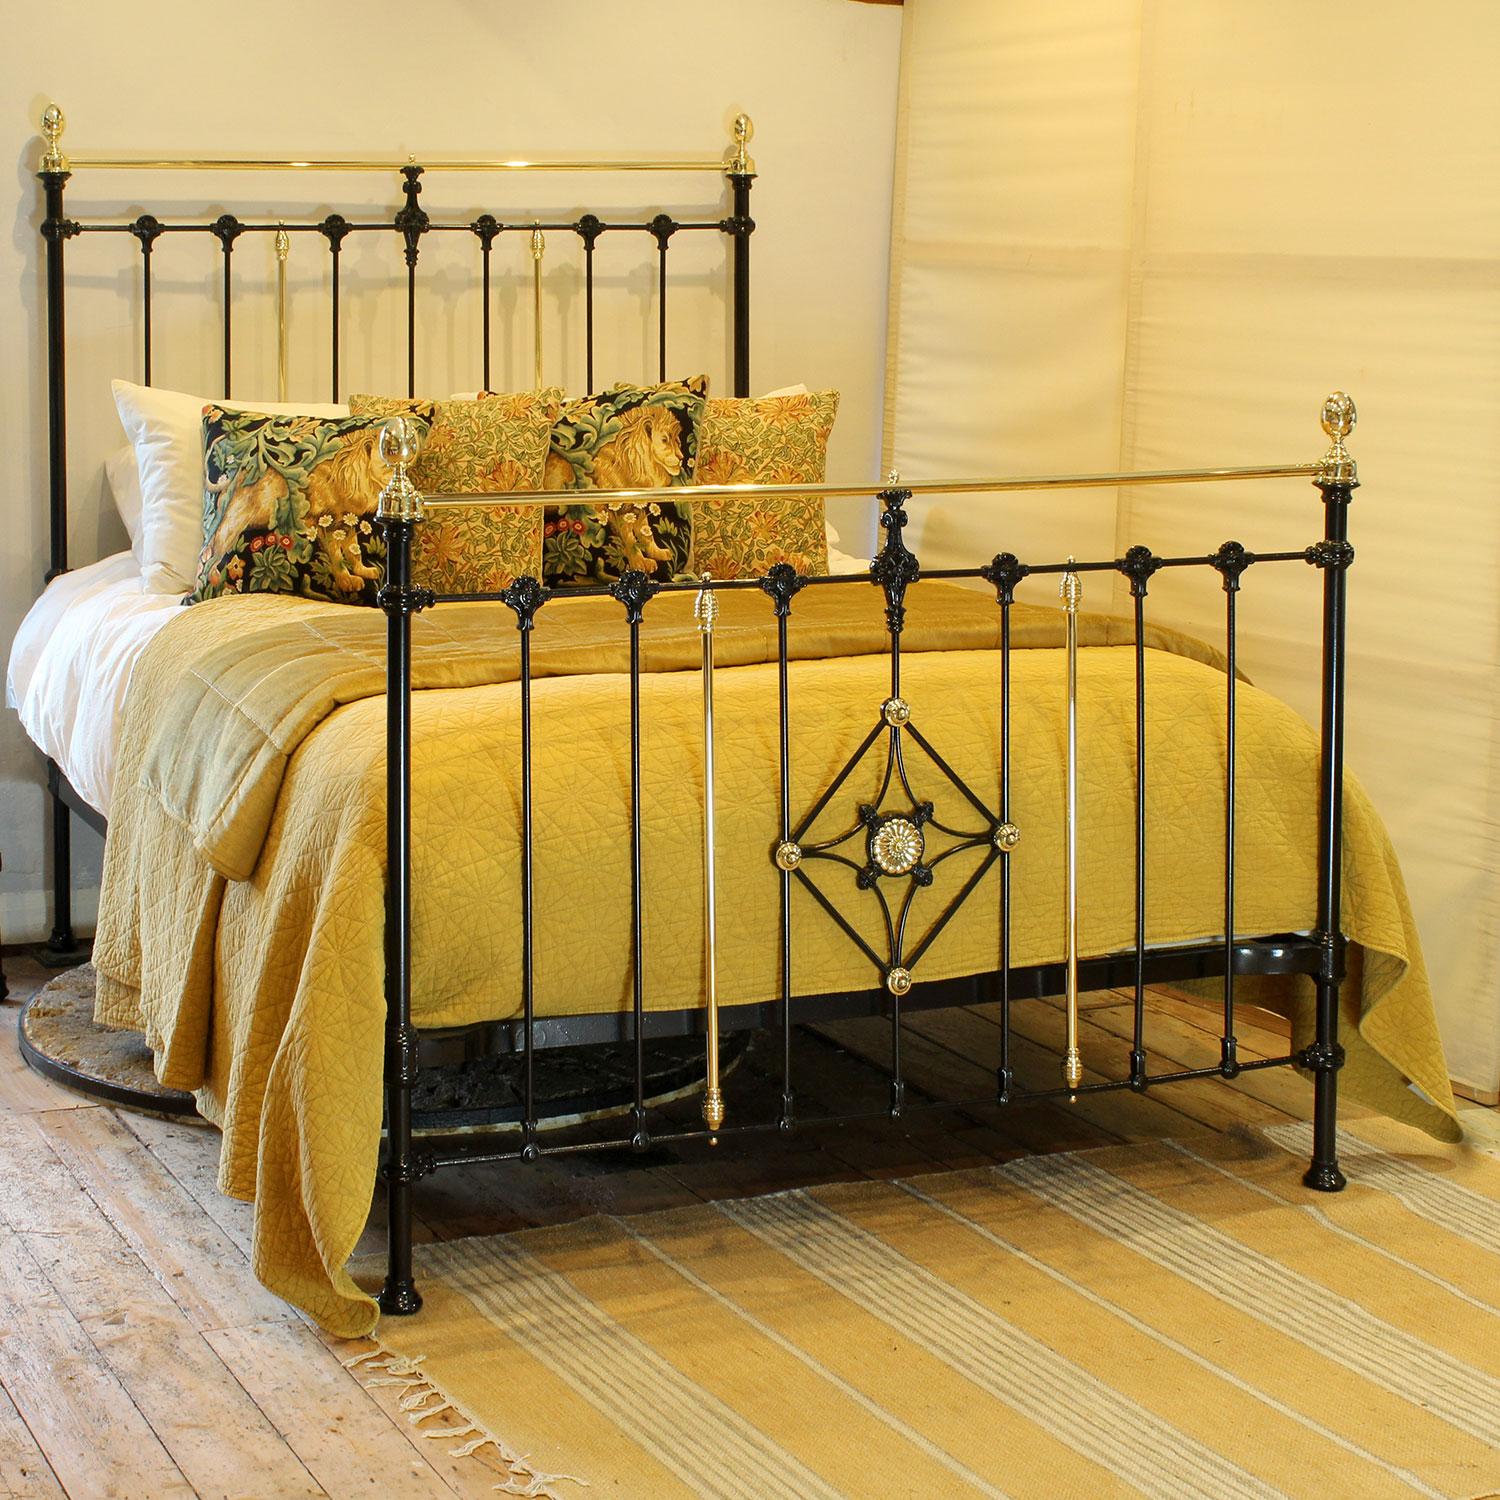 A handome Victorian brass and iron bed finished in black with decorative feature in the foot panel, cap collar,s oval brass knobs and decorative castings.

This bed accepts a UK King or US Queen, 5ft or 60in wide, mattress and base.

The price